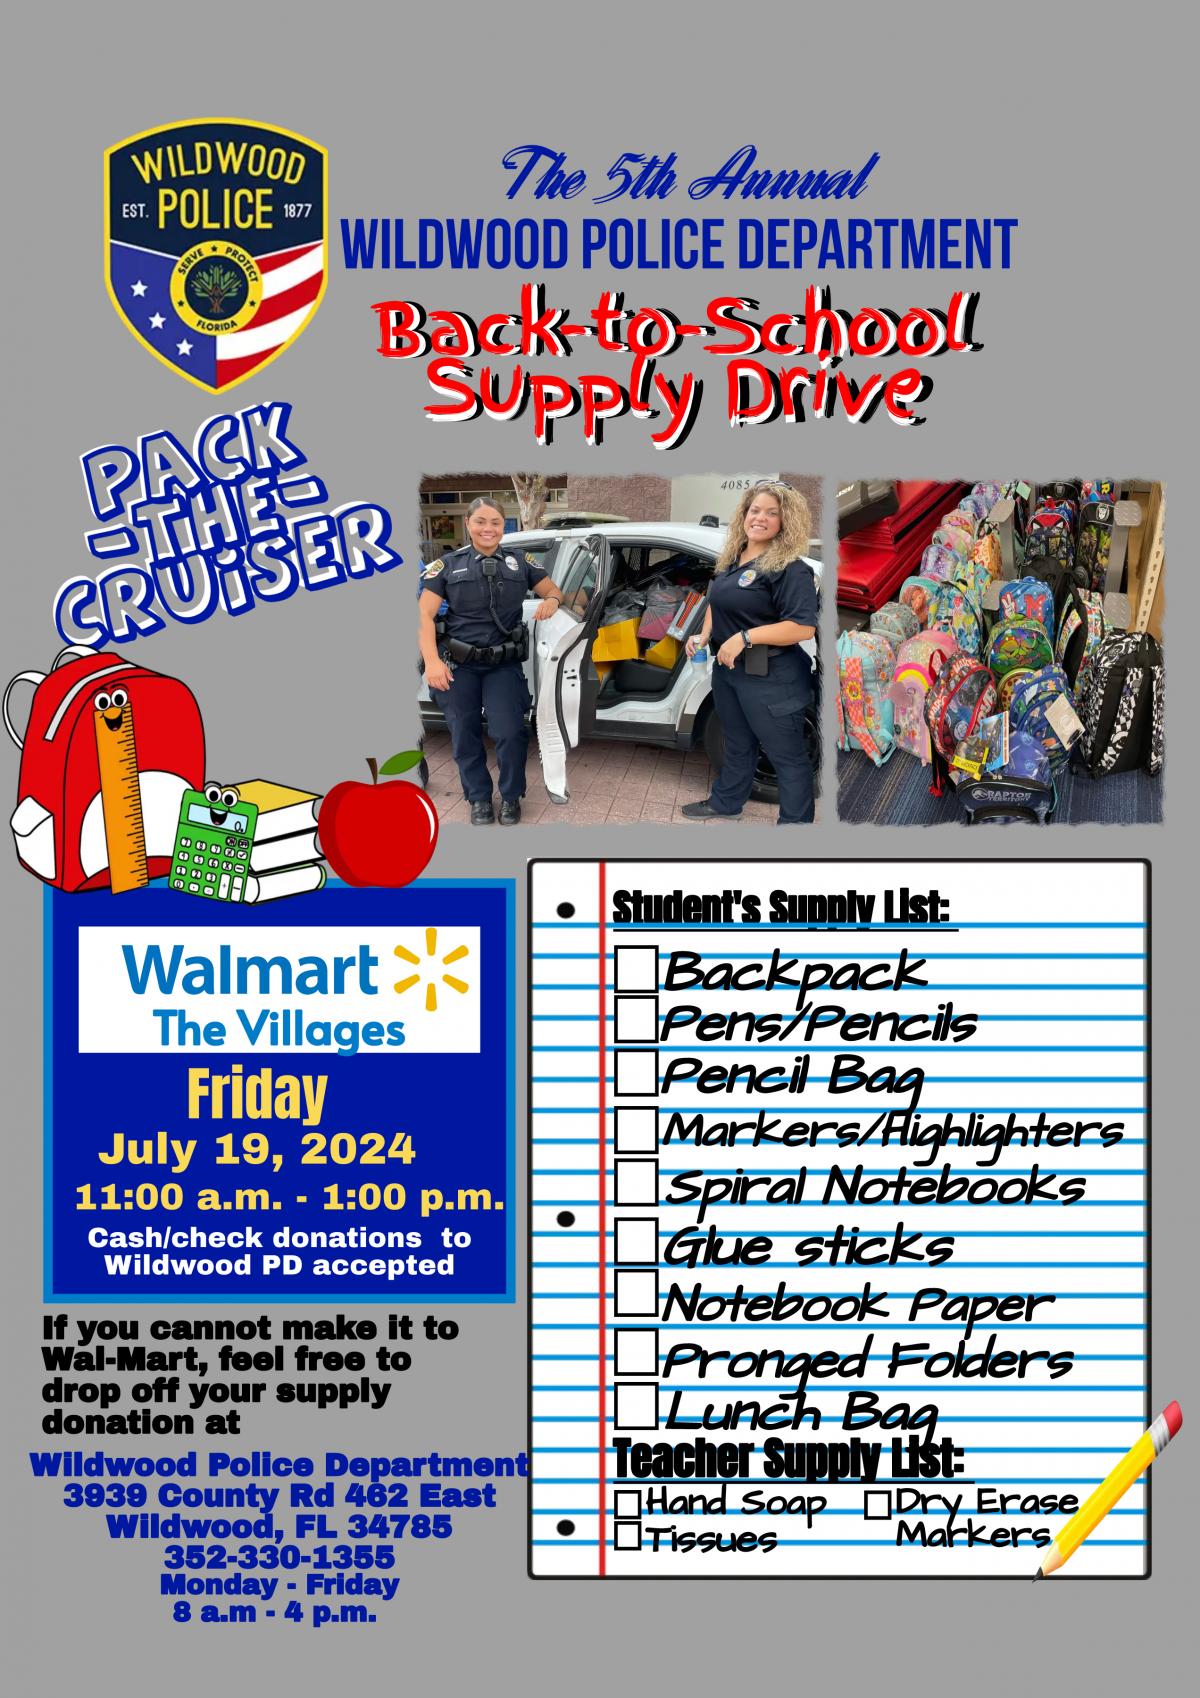 Wildwood Police Department "Back-to-School Supply Drive"  7/19/24, 4085 Wedgewood Lane, The Villages, Fl 32162, 11am-1pm